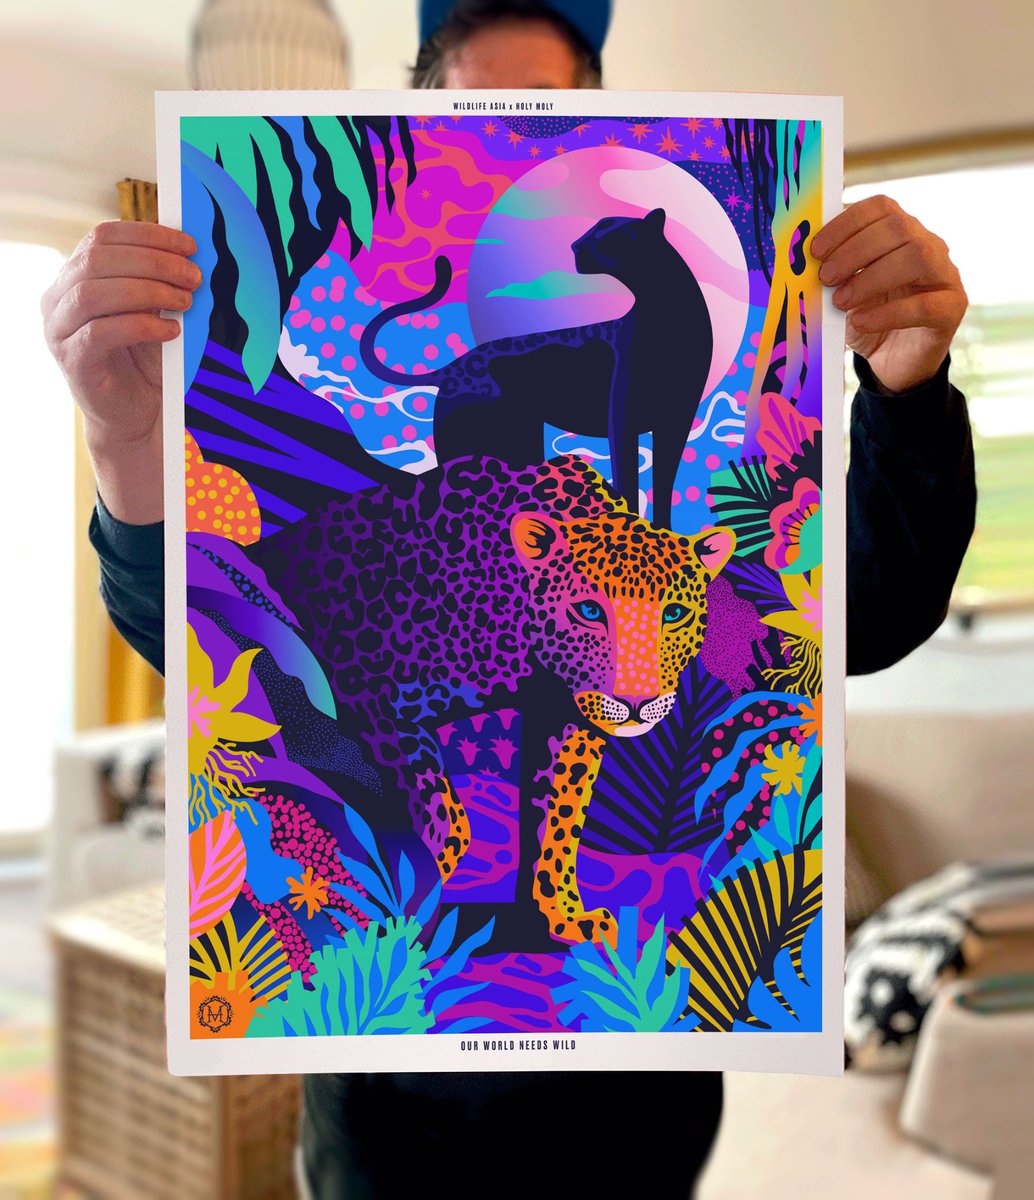 Details from our new Our World Needs Wild print from @moly_uk 'Night Leopards' 💚💚💚 A3, A2 & A1 for 40/60/80 GBP 100% profits to leopard conservation 🌏 Available here: pardicolor.org/shop #wildlifeart #leopards #artistsontwitter #wildlifeartist #artforconservation